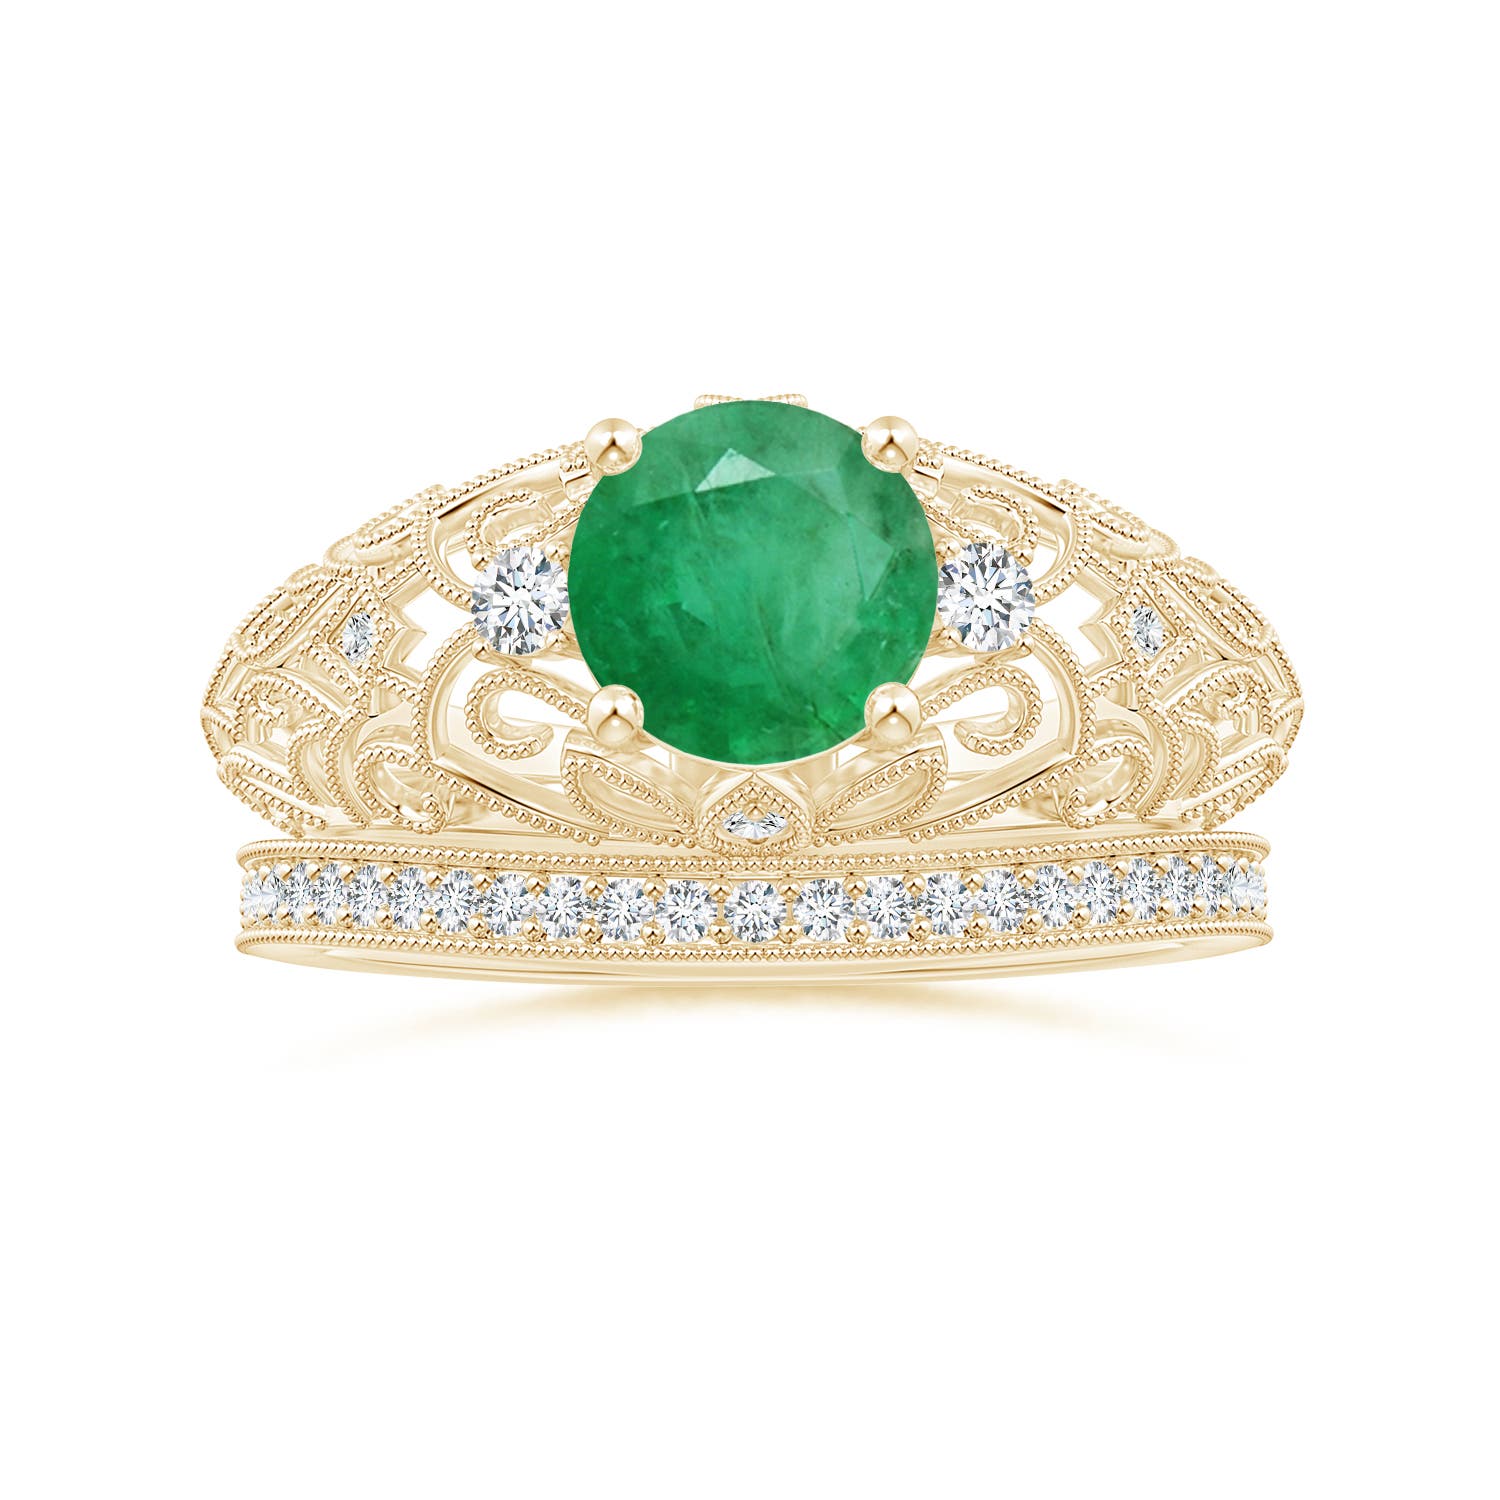 A - Emerald / 1.3 CT / 14 KT Yellow Gold